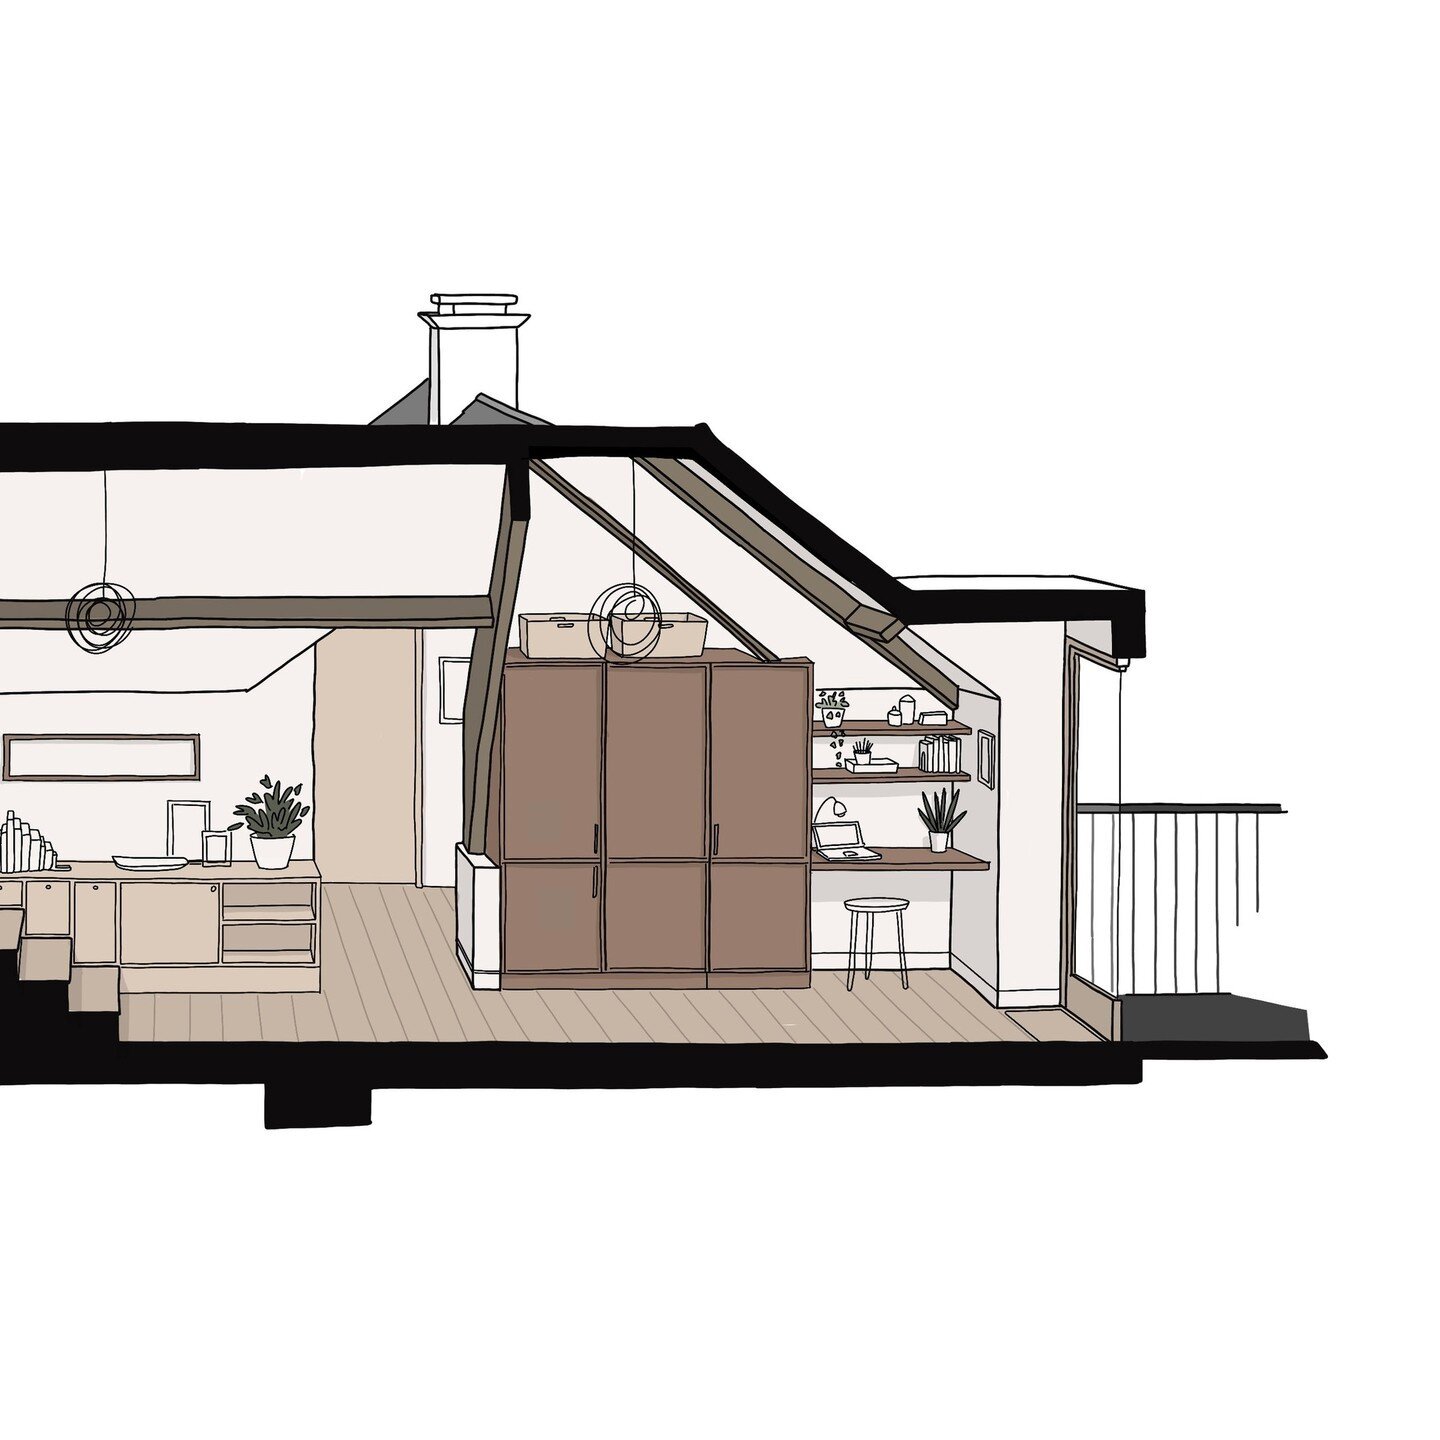 [1/2] Sectional perspective through a new residential scheme 🏡⁠
.⁠
.⁠
.⁠
.⁠
.⁠
⁠
#katherinedaunceyillustration #architecturaldrawing #architecturalvisualisation #architecturalvizualization #architecturalillustration #architecturalsketch  #architectu